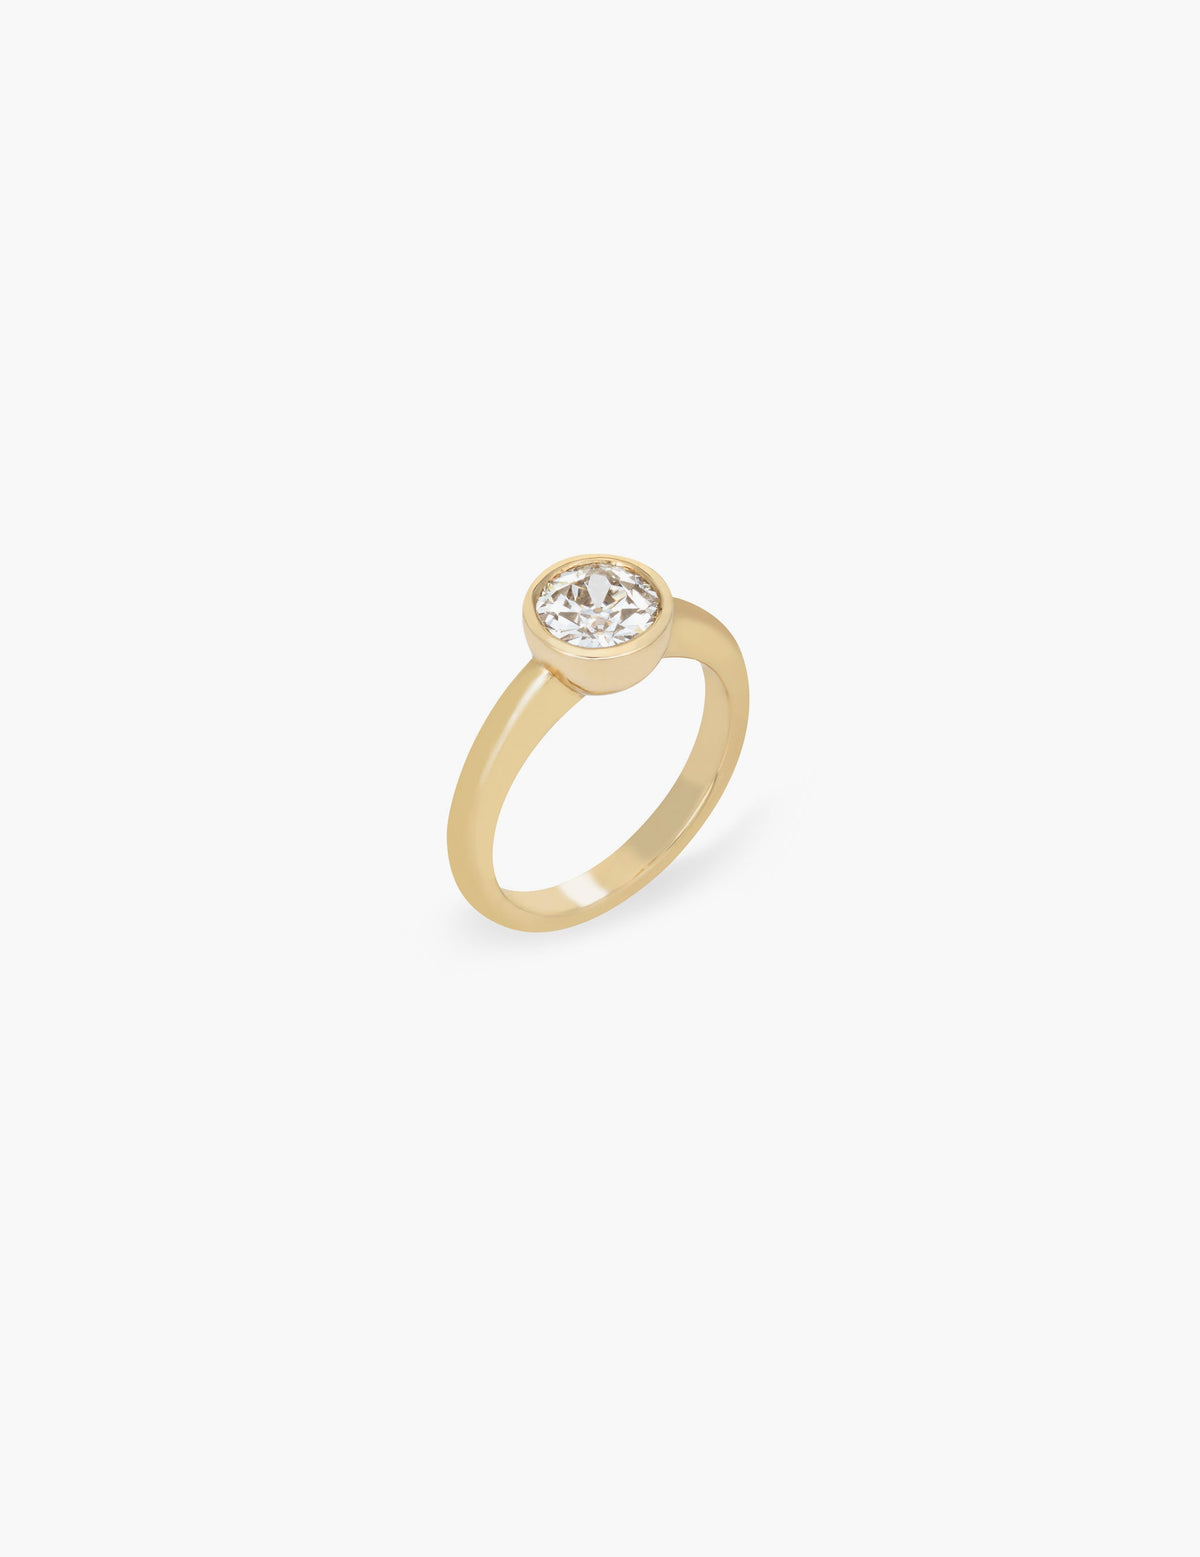 Jane Ring with 1.12ct Transitional Cut Diamond